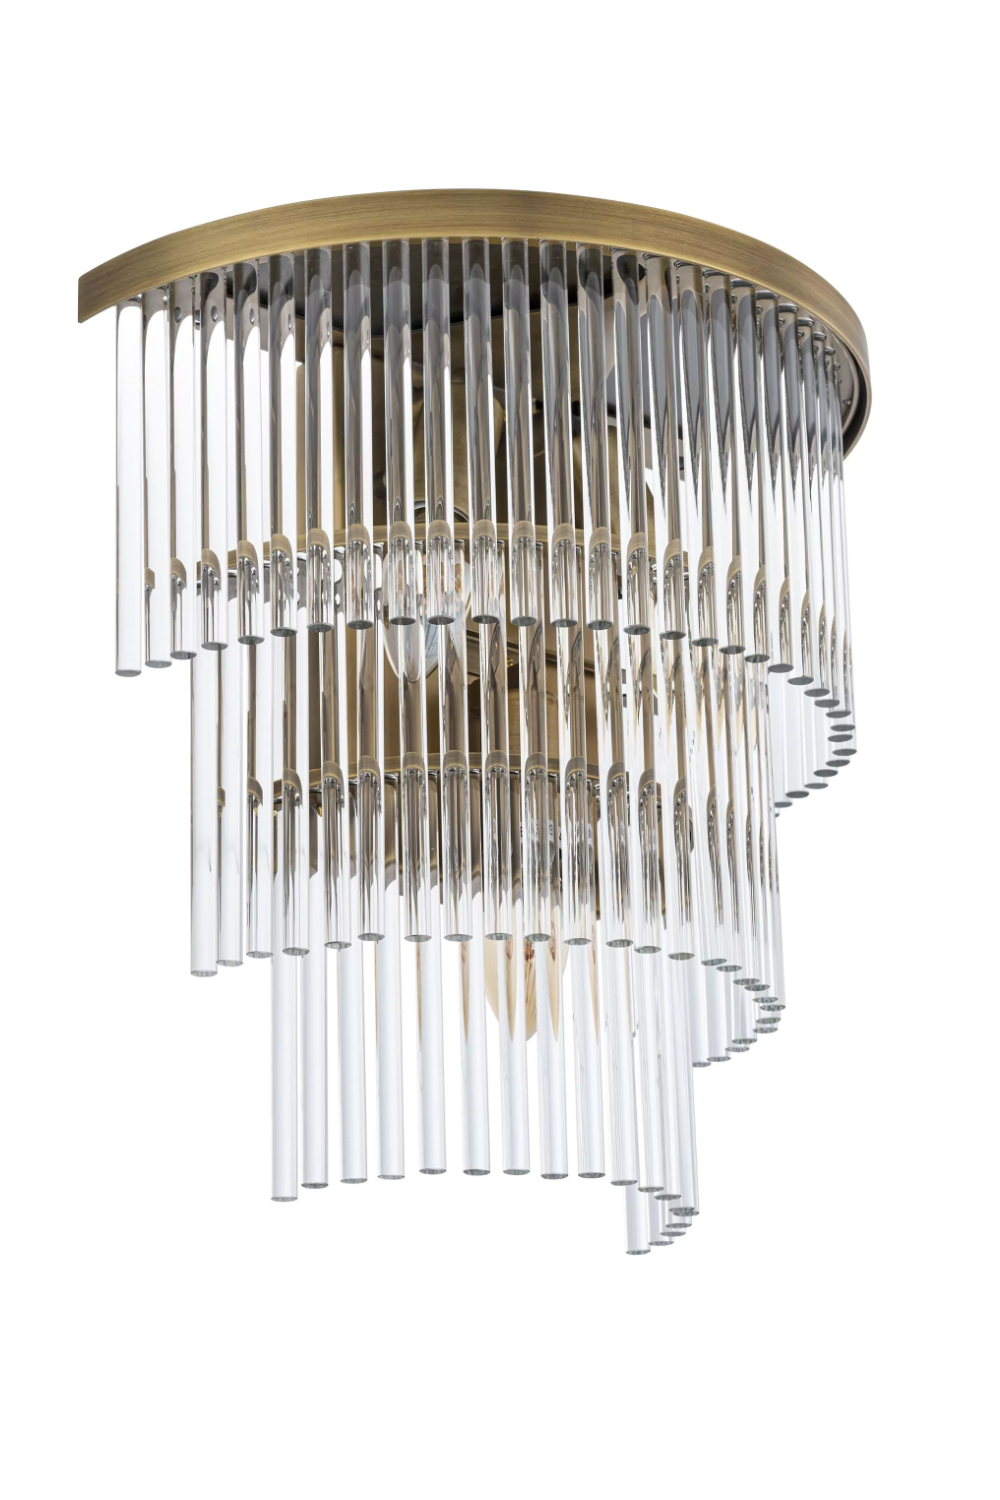 Glass Rods Wall Lamp | Eichholtz East | OROA